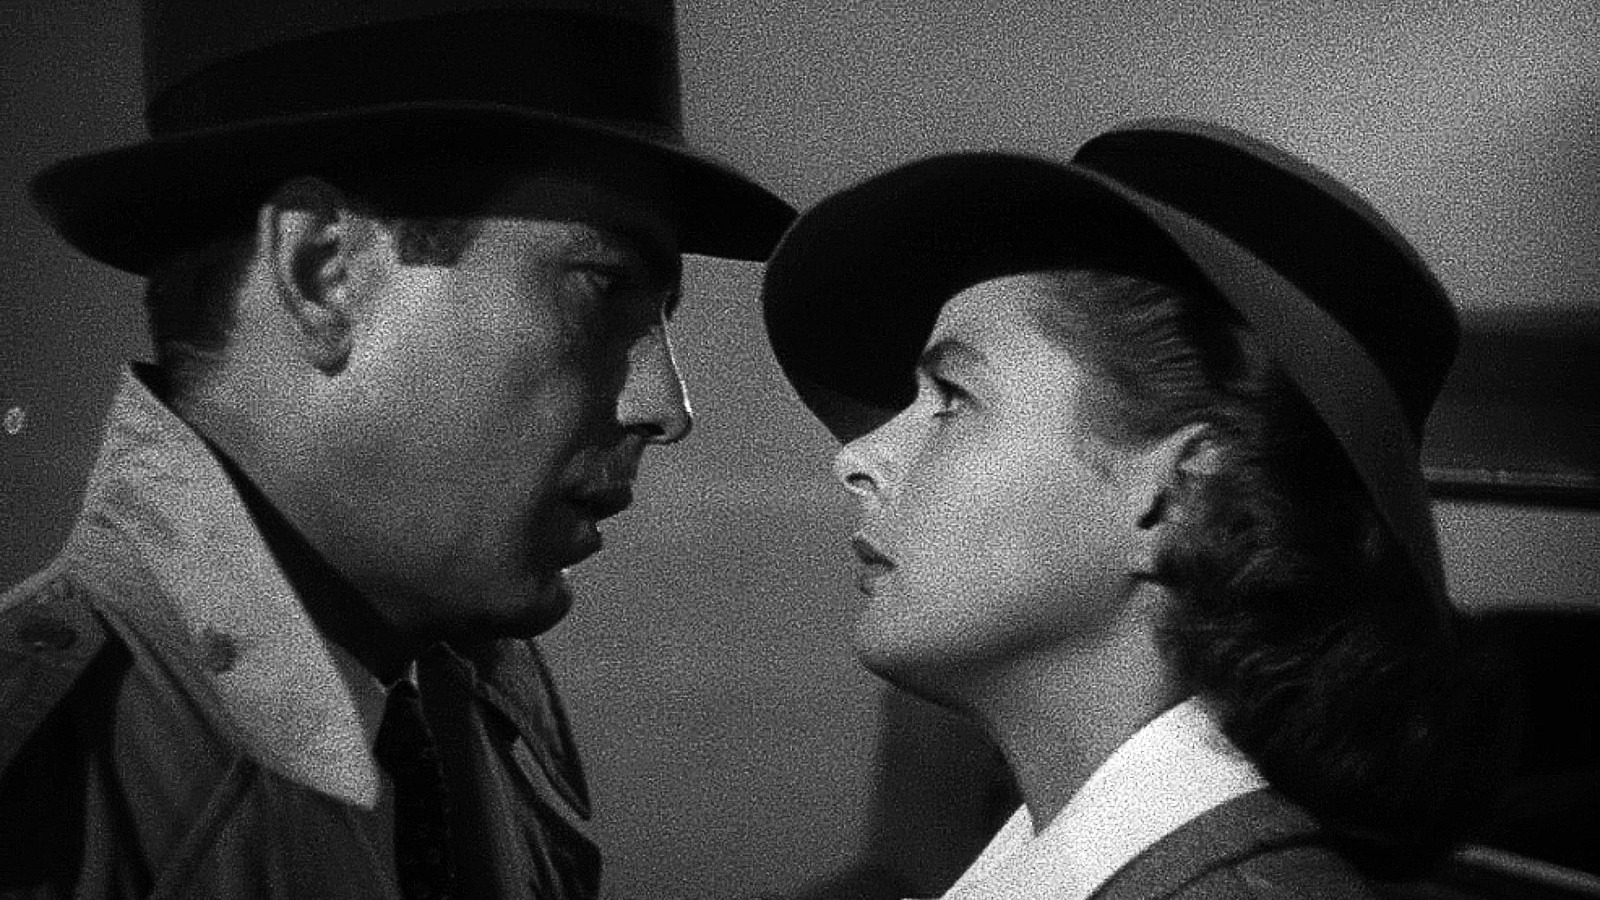 Casablanca Ending Explained: The Conclusion Of A Dizzying Romance, And The Beginning Of A Beautiful Friendship